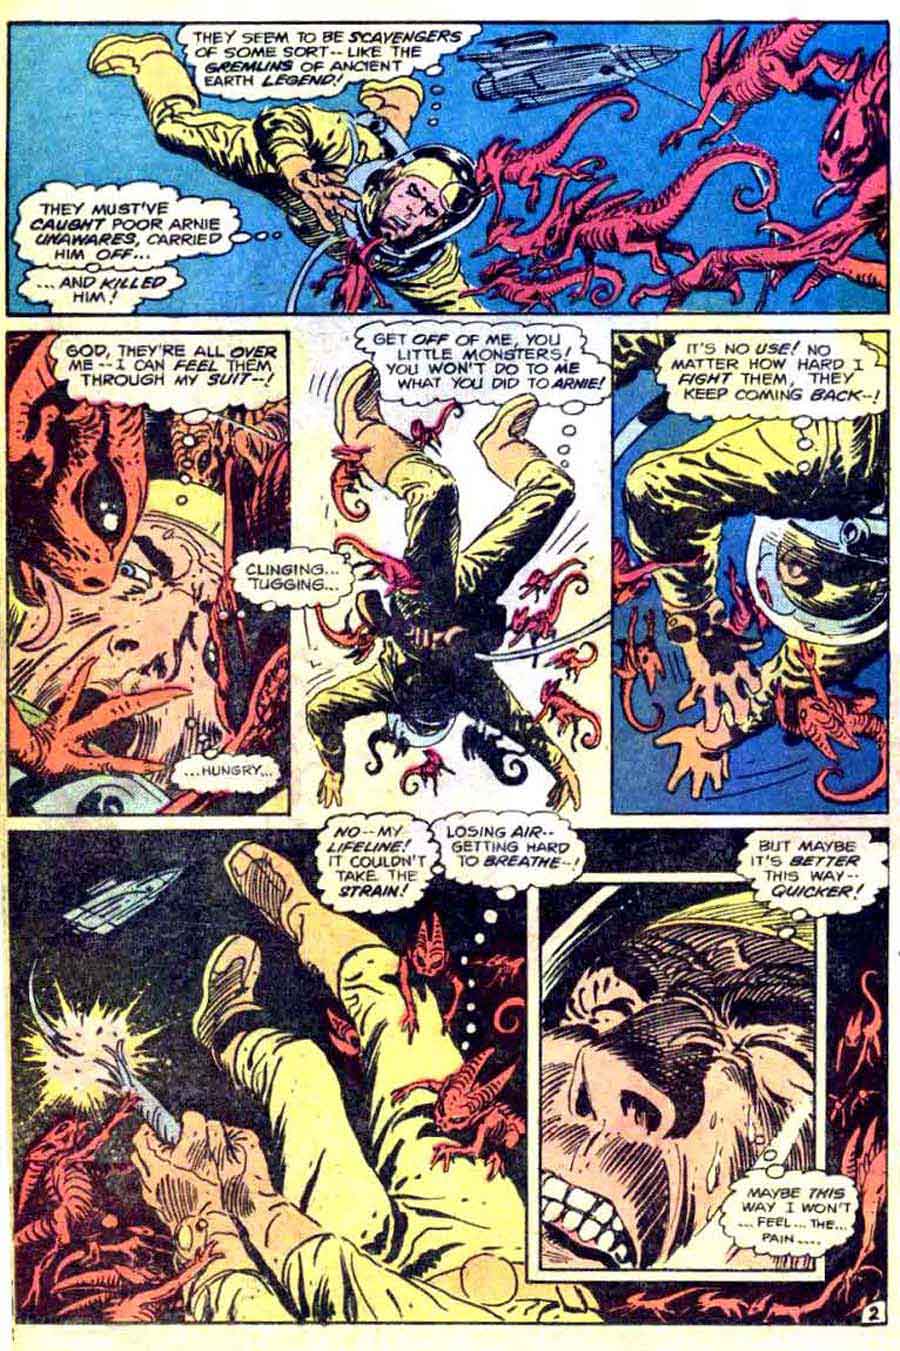 Joe Kubert dc science fiction dc 1980s comic book page - Mystery in Space #113